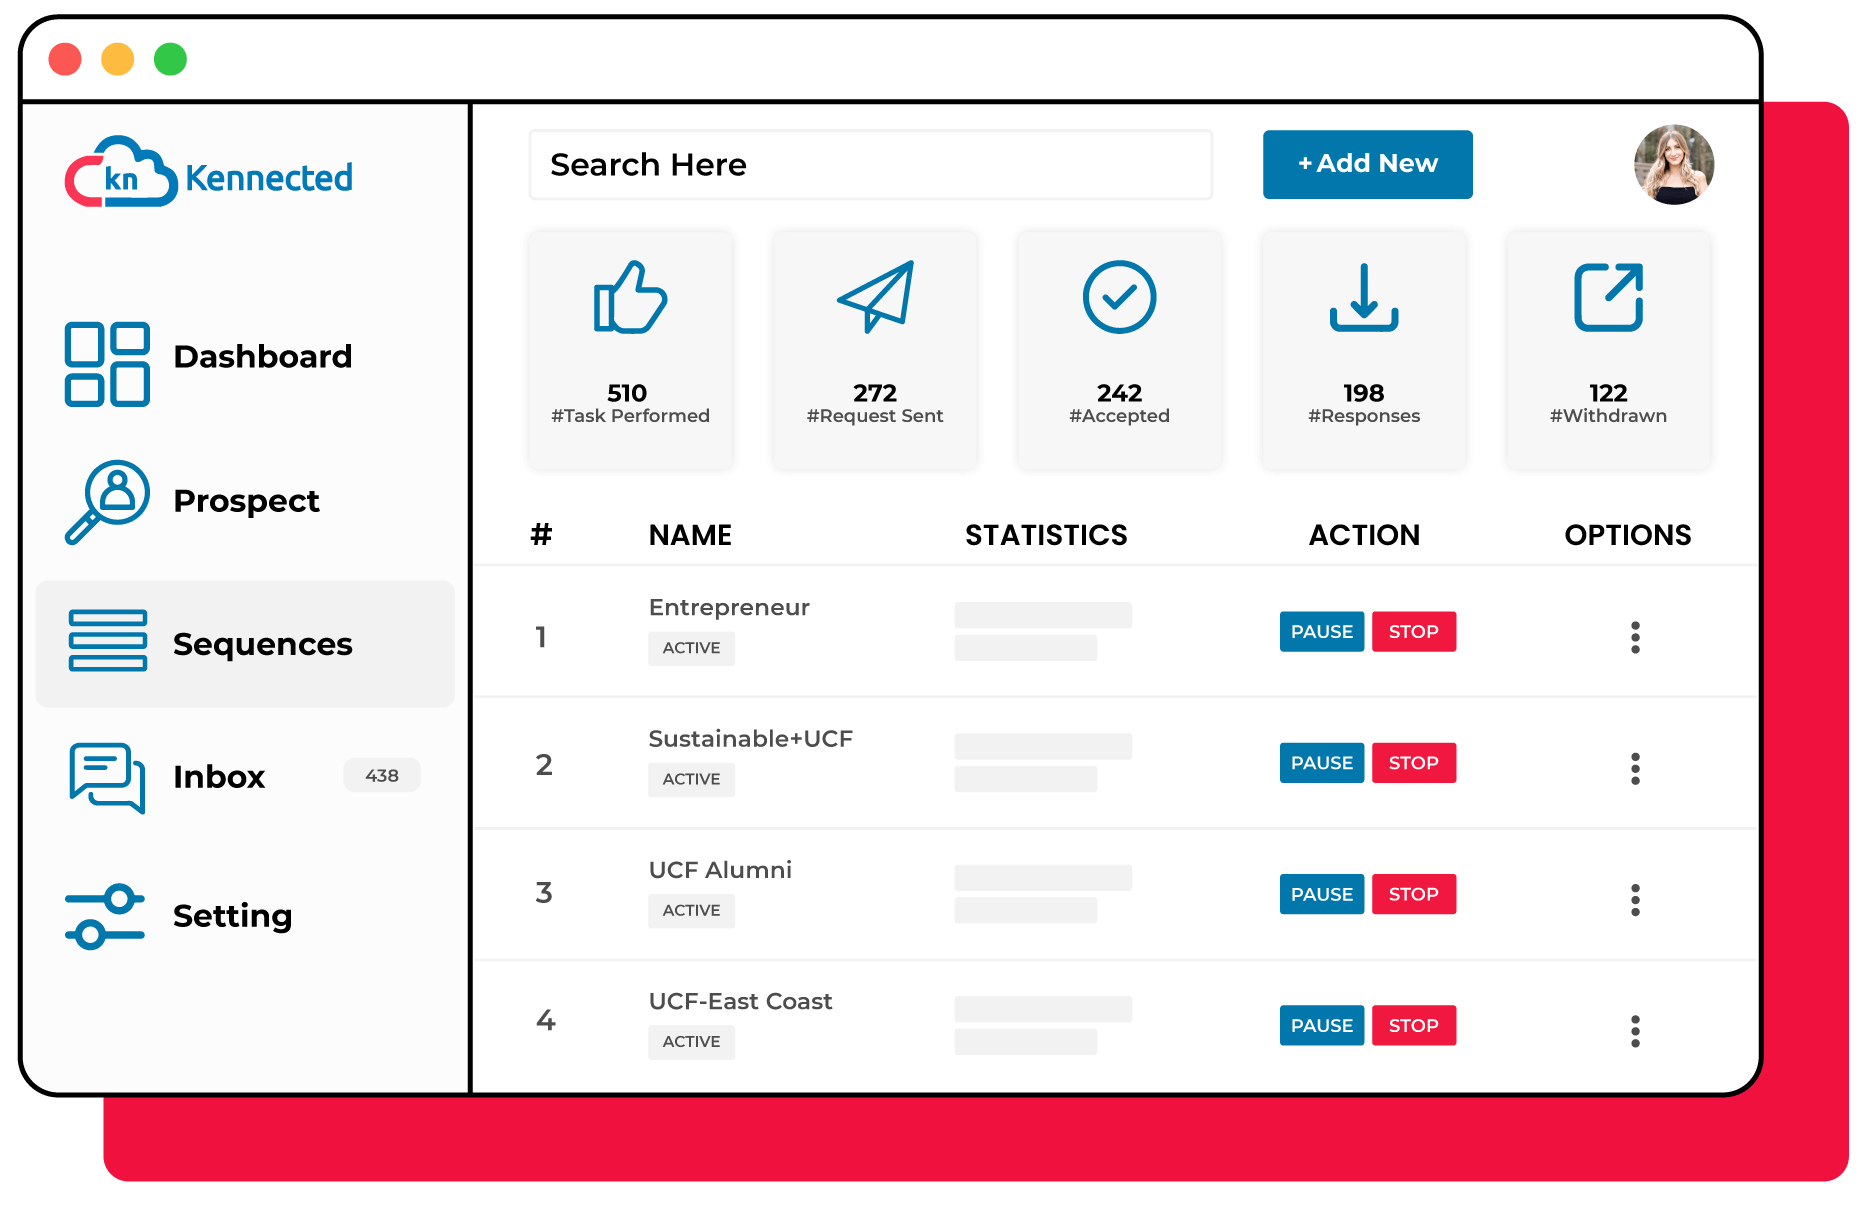 Get Key Insights With Campaign Metrics: With our detailed and real time analytics dashboard, you’re able to see which campaigns are driving the most results and track the health of your account based on your LinkedIn SSI score.